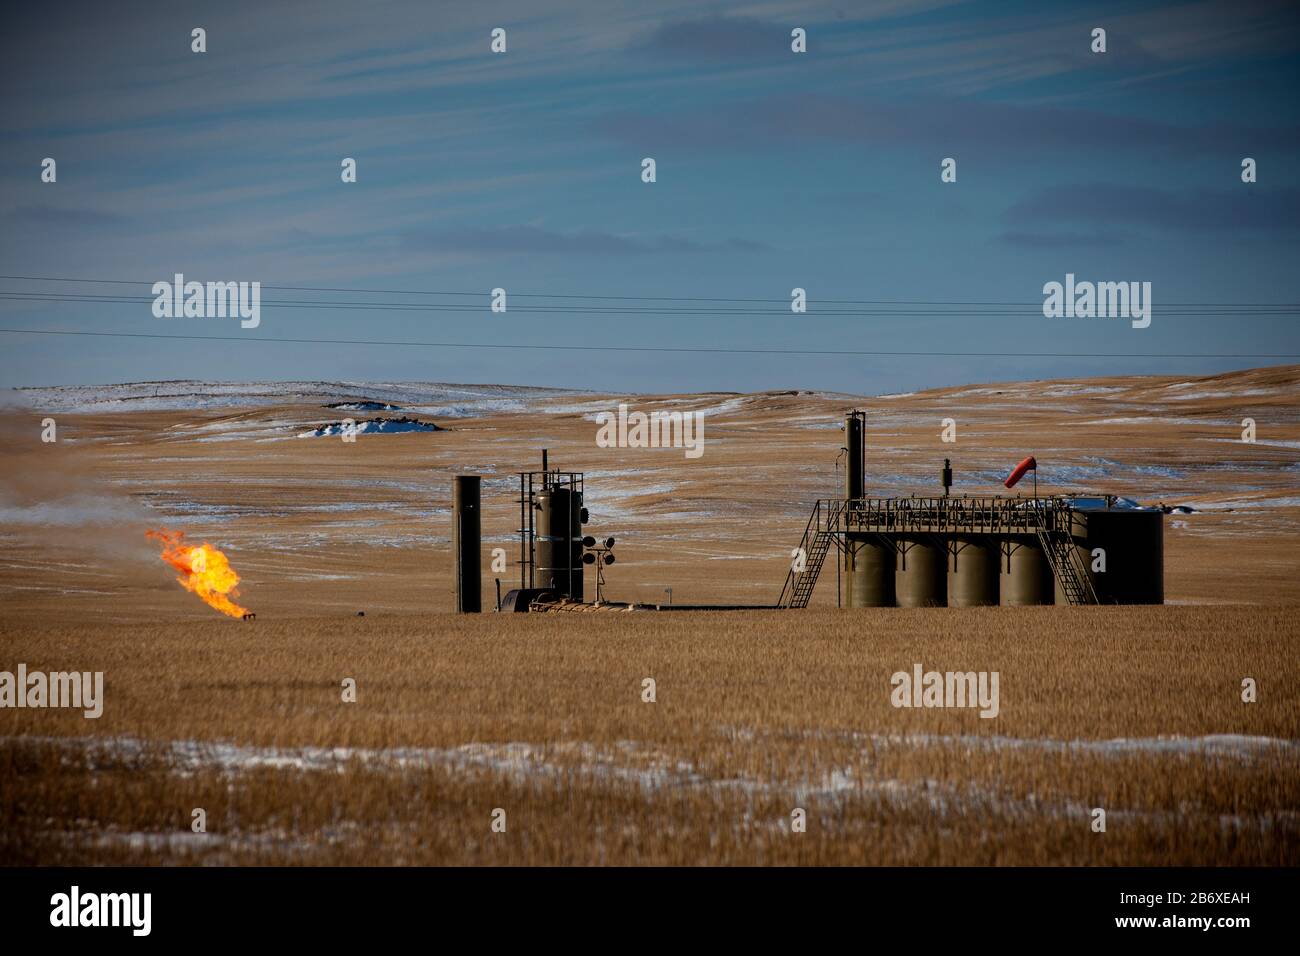 Flaring of gas from an oil well outside Williston in North Dakota. The area is part of the Bakken oil field, where fracking technology has made it profitable as long as the oil price stays above USD 46 per barrel. Stock Photo